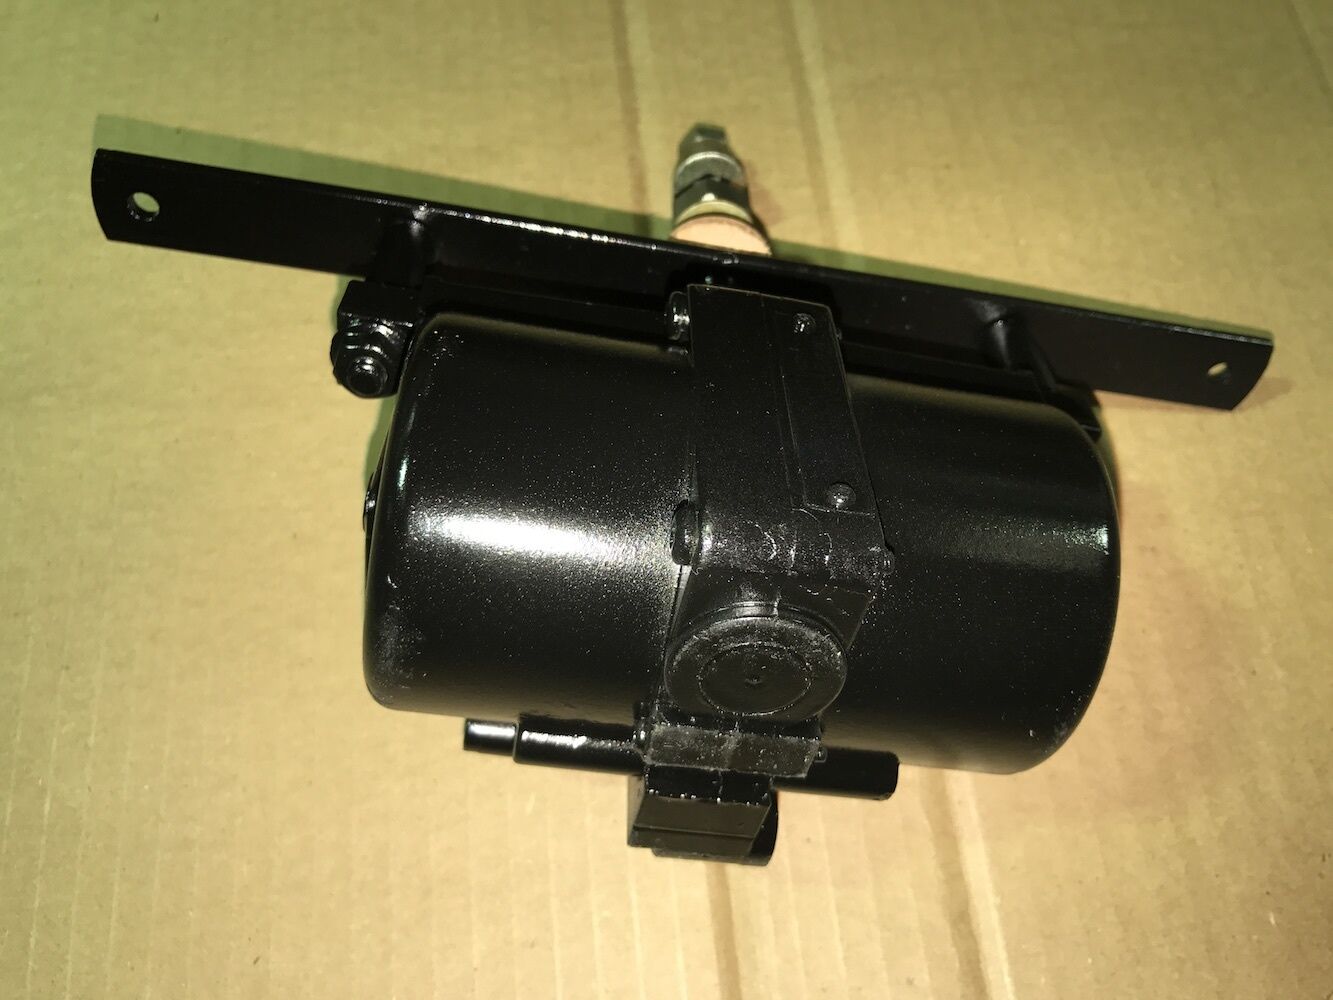 WIPER MOTOR (ONLY)  -   M939 ; 5TON ;  2540-01-310-4854  ;  12356925  ;  GS-2523